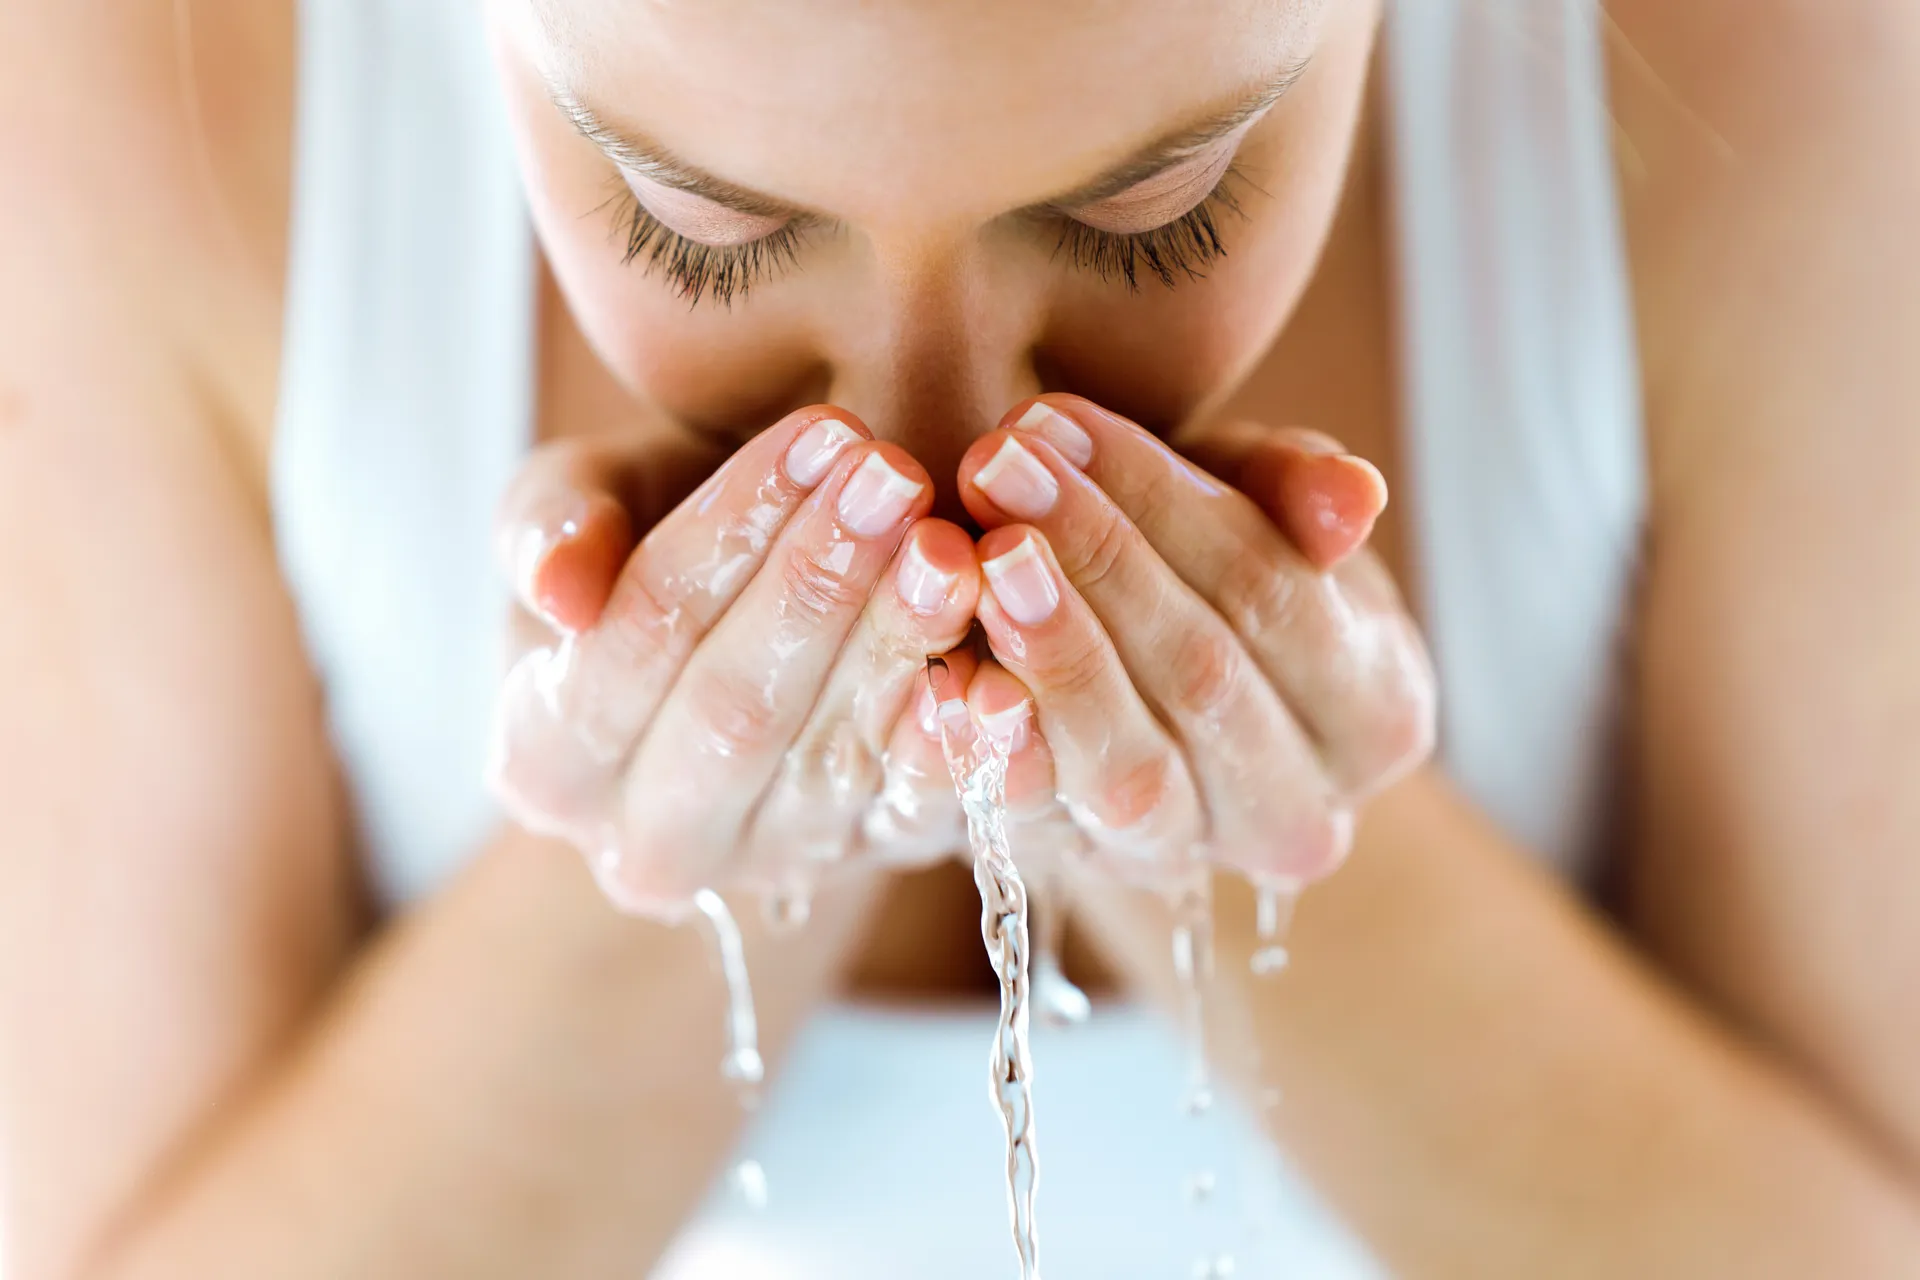 Image shows a lady washing her face